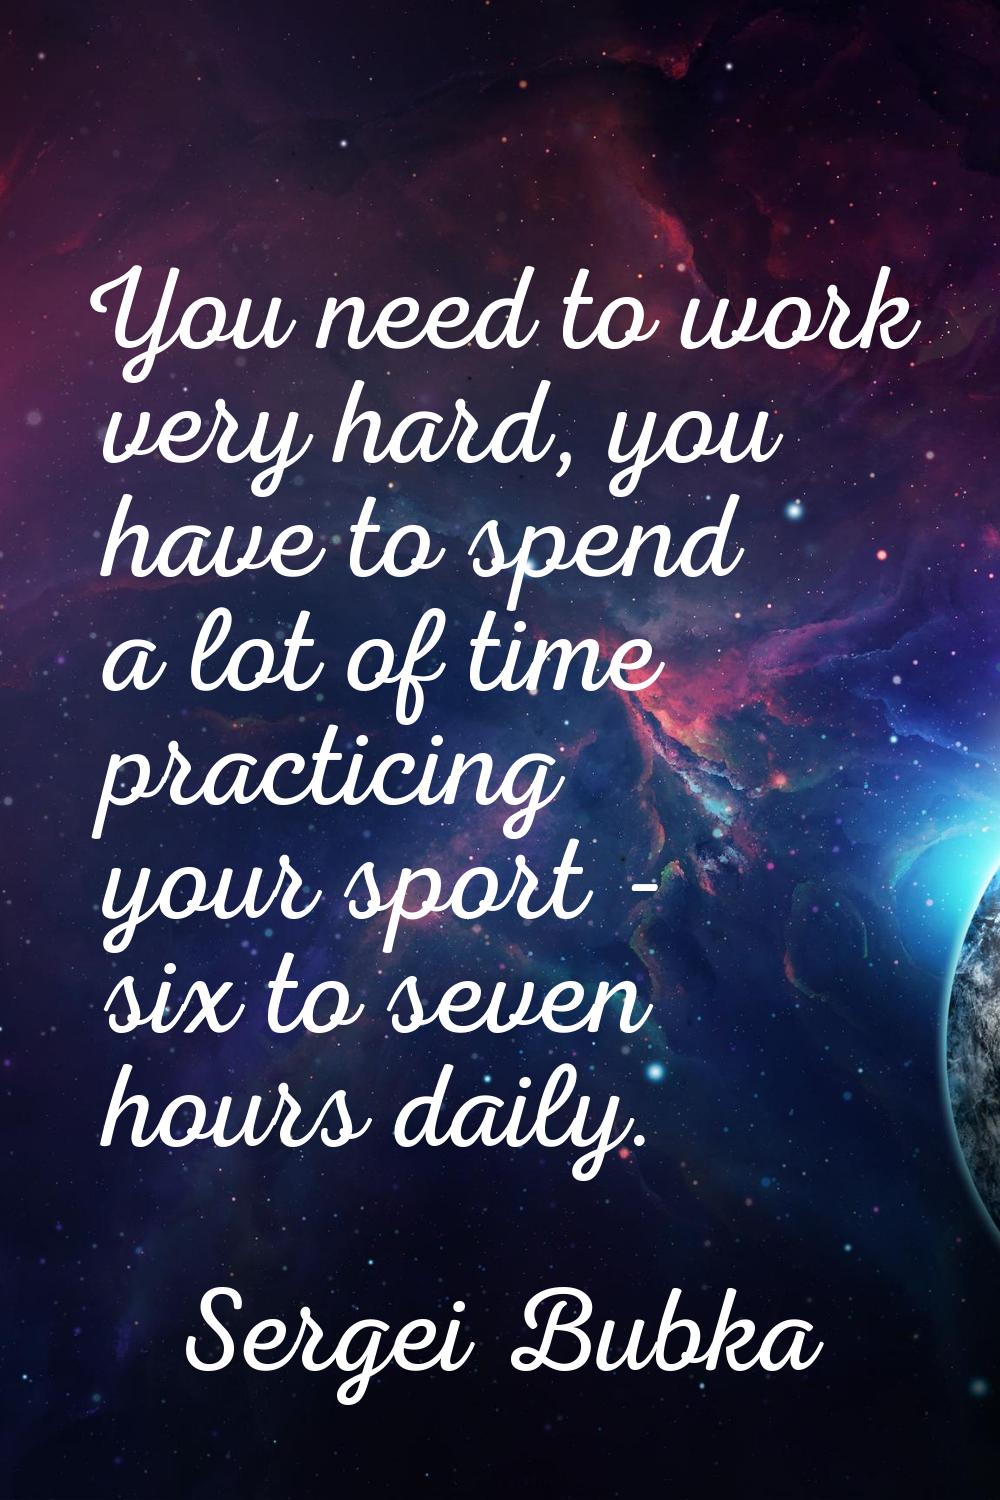 You need to work very hard, you have to spend a lot of time practicing your sport - six to seven ho